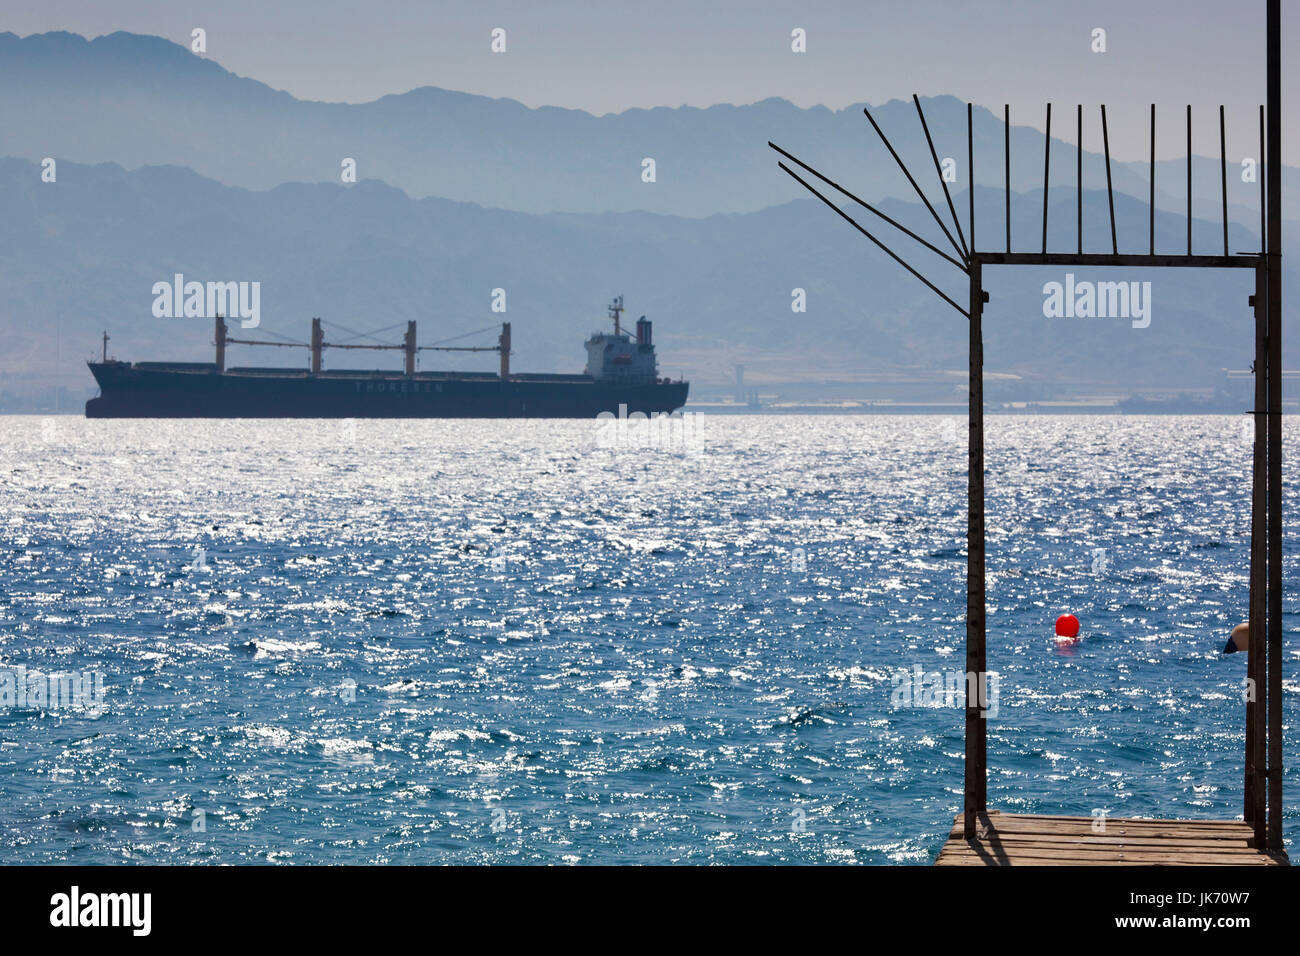 Israel, The Negev, Eilat, Red Sea beachfront, freighter Stock Photo